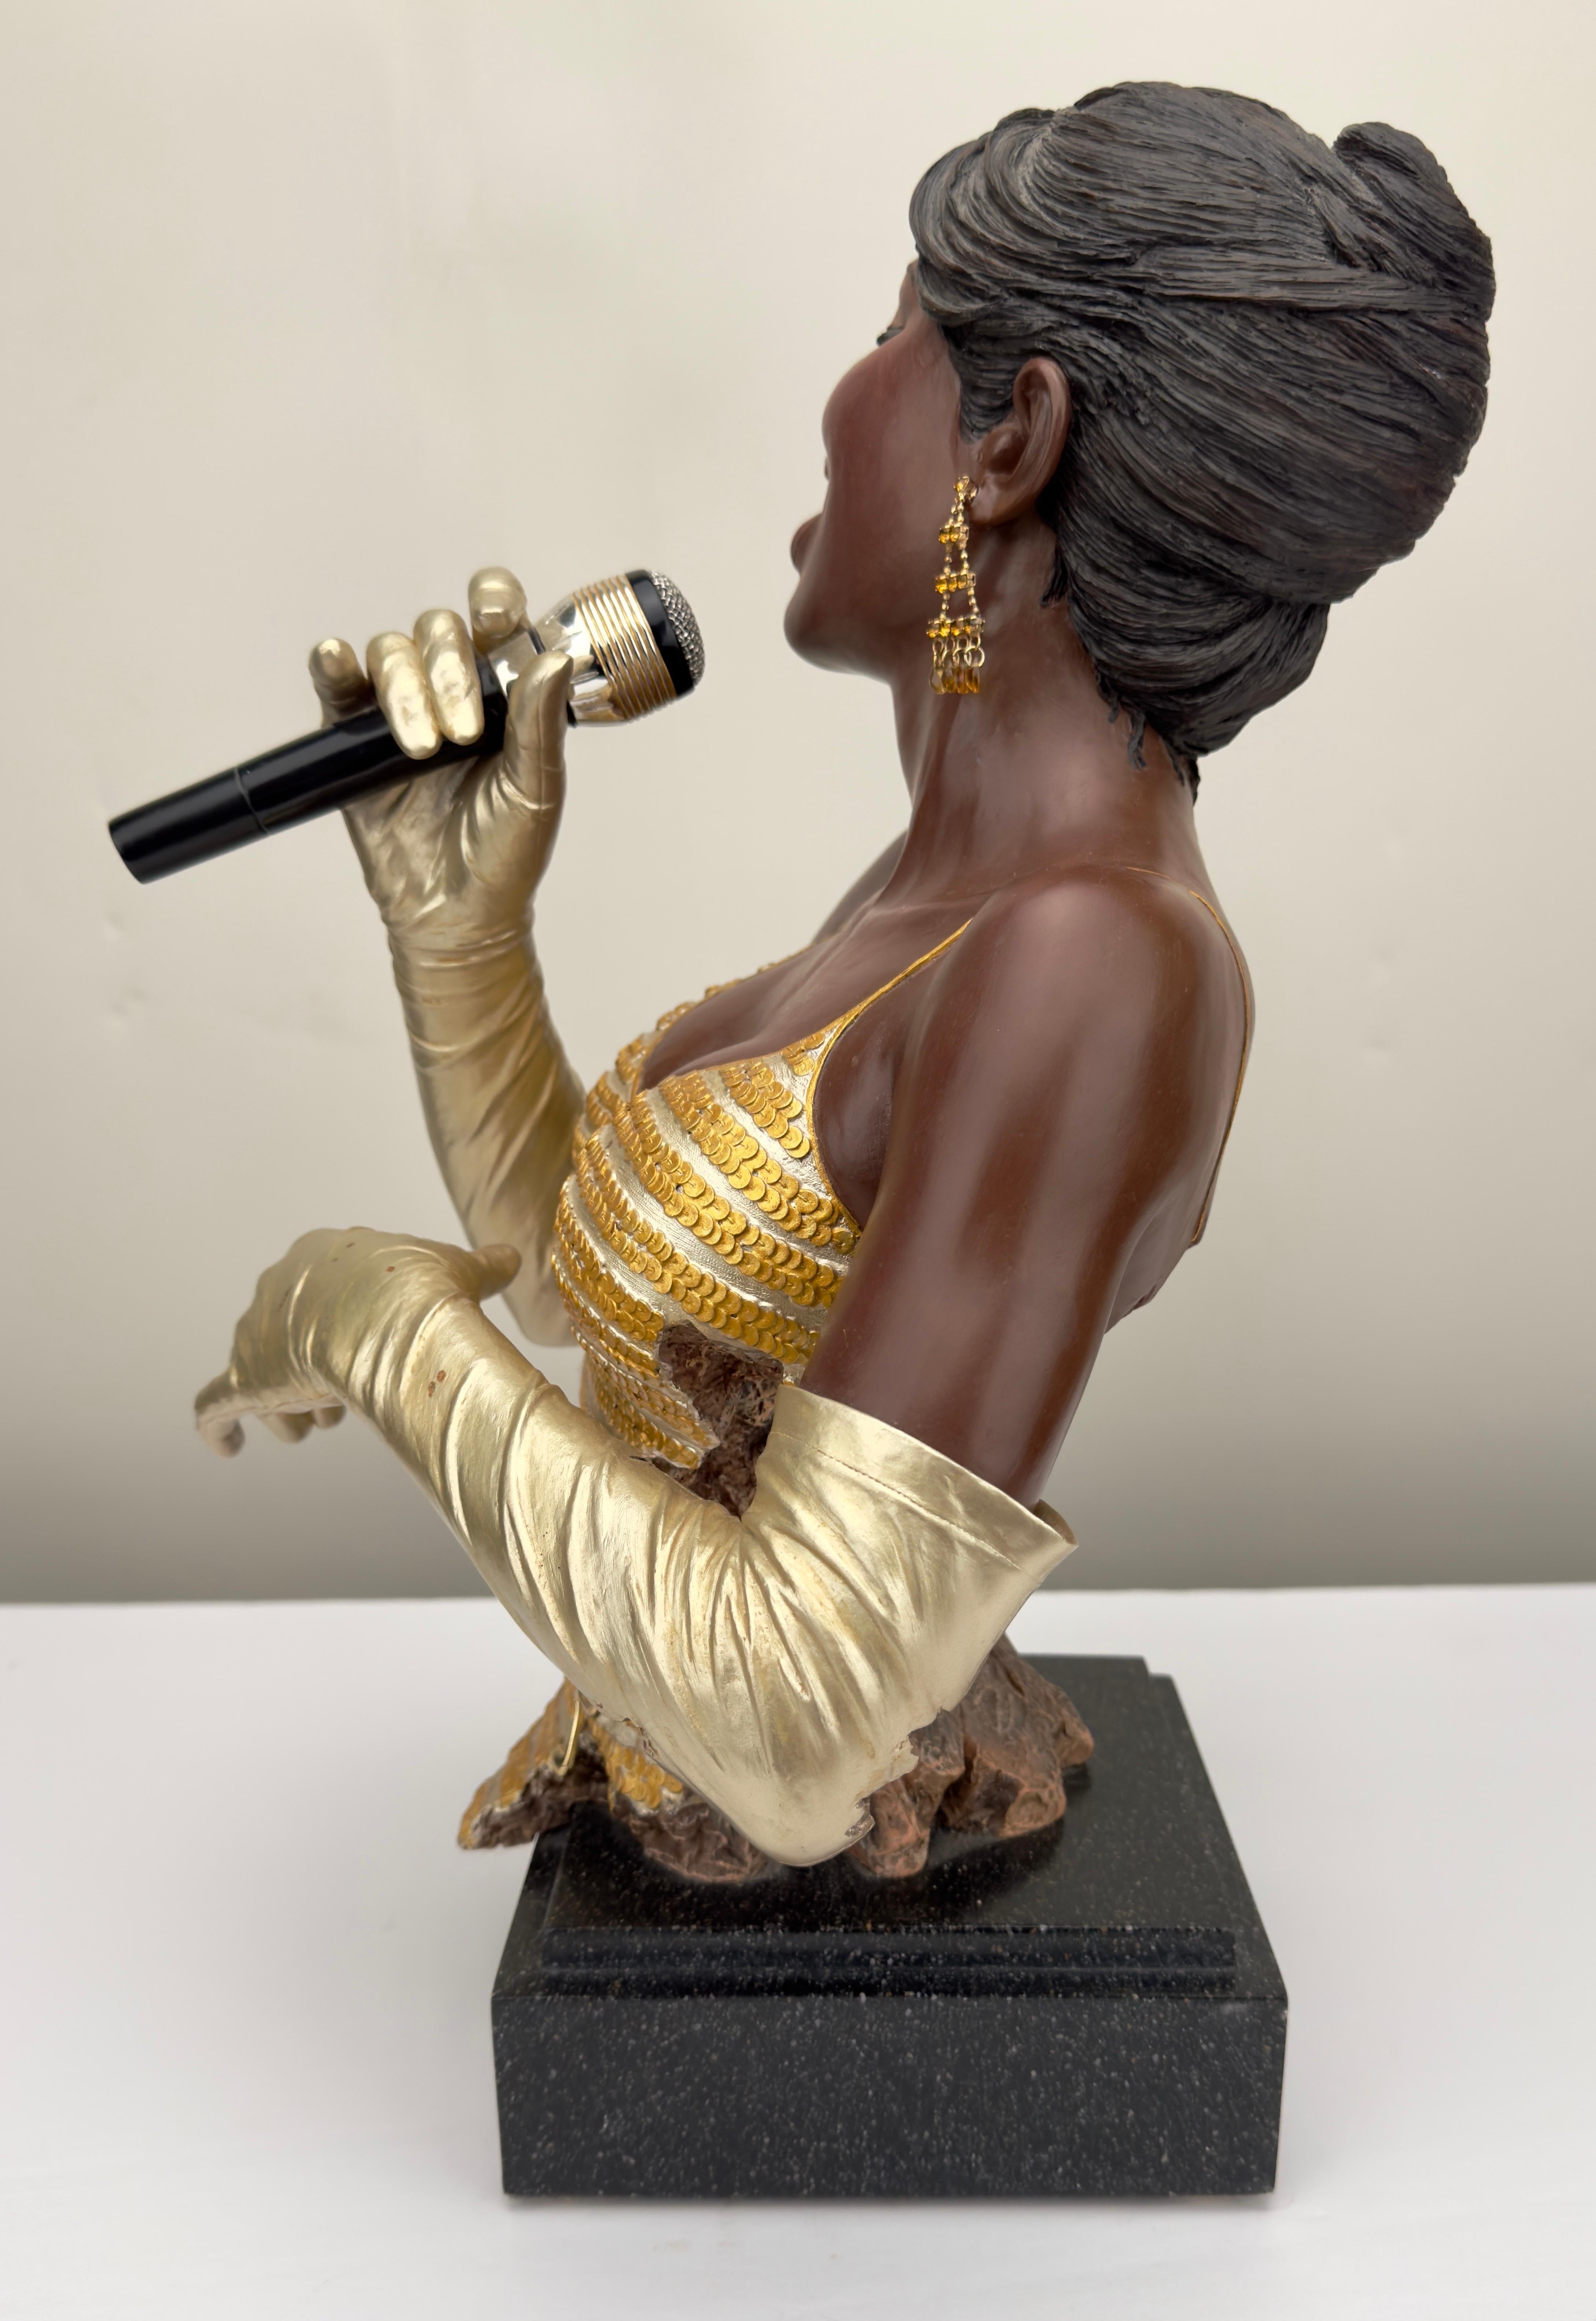 An impressive lady in gold jazz singer sculpture by Willitts Designs International and Shen Lung. The sculpture is cold painted and made of hand cast resin. The singer is wearing gold gloves, gold dress and gold earrings. The art piece is standing